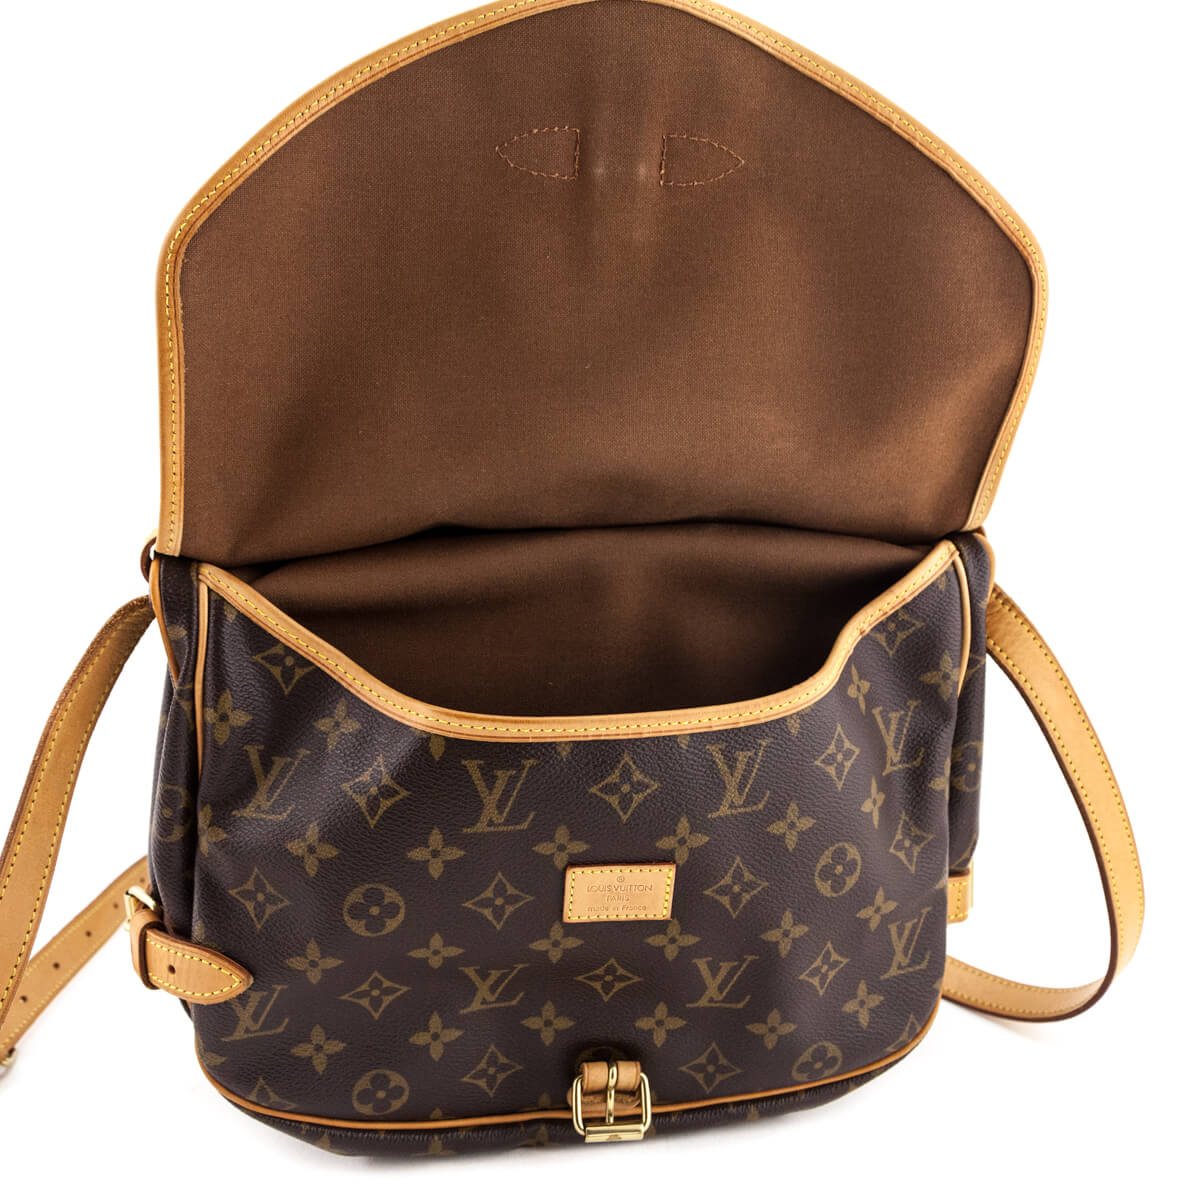 What Goes Around Comes Around Louis Vuitton Monogram Saumur 30 Bag  (Previously Owned), SHOPBOP, Use Code SPRING …